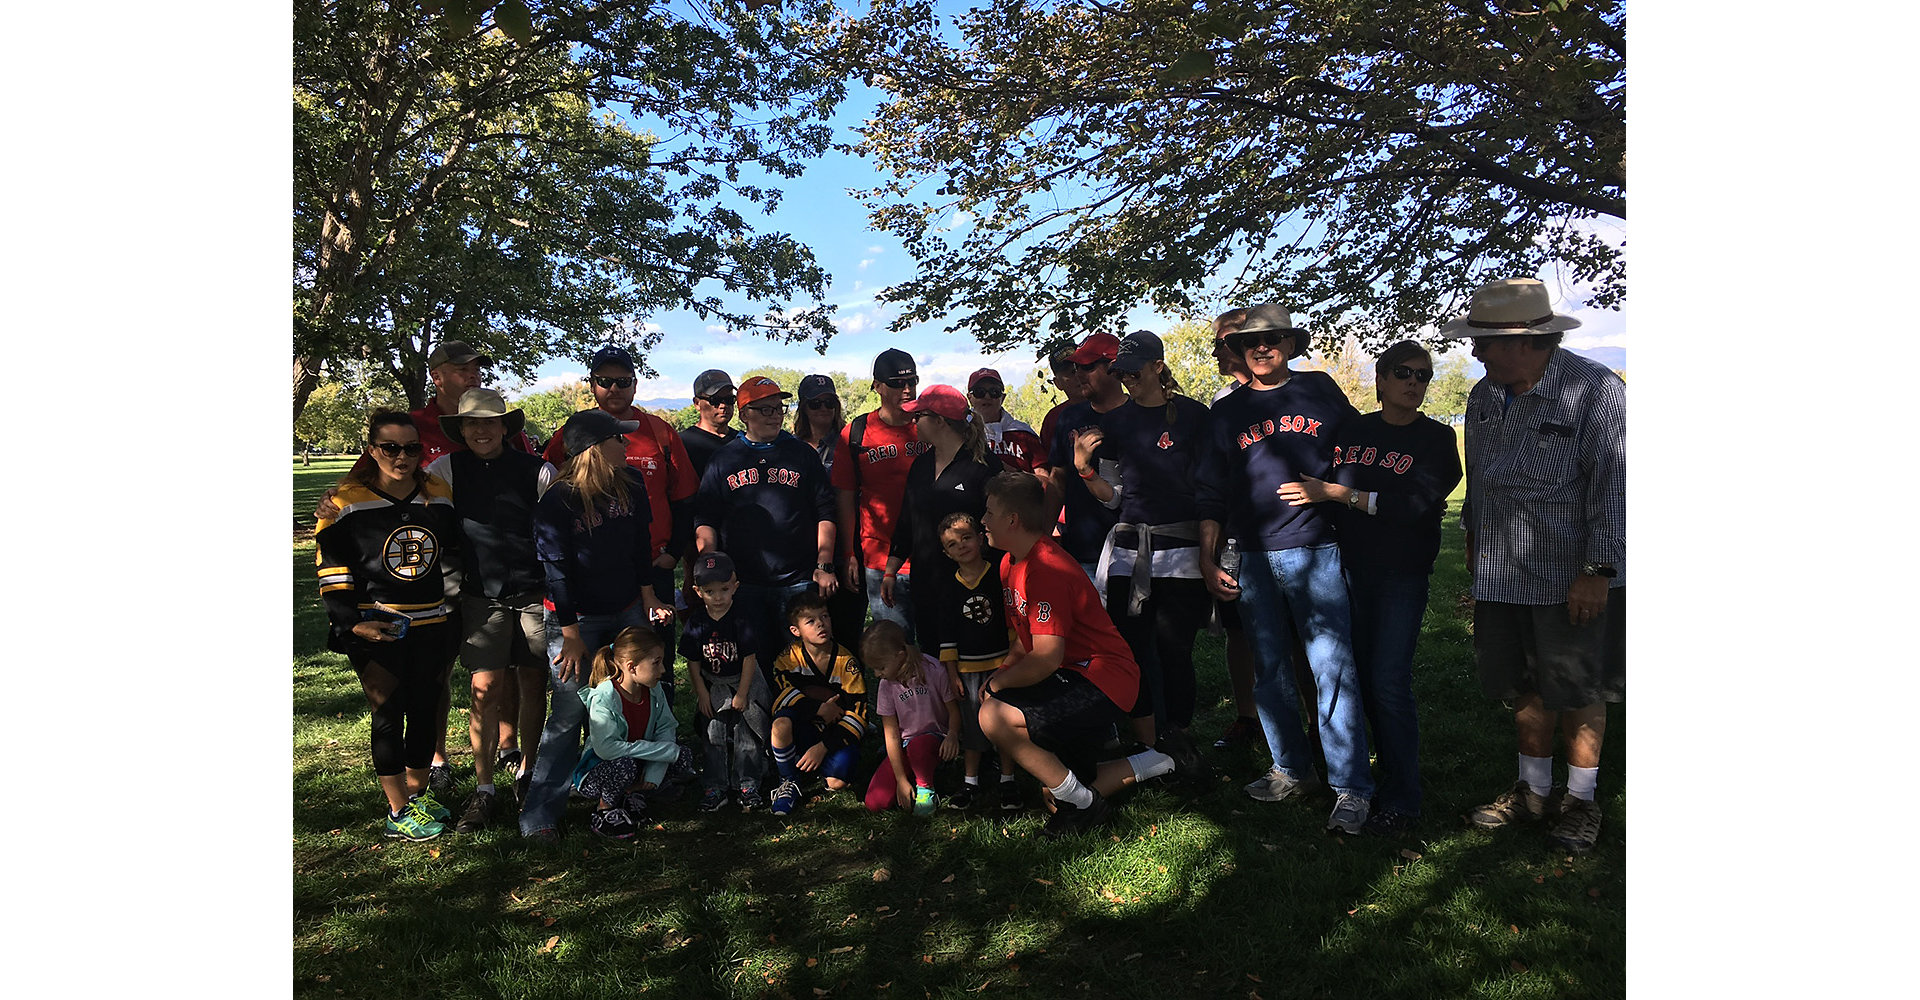 Plumbline group at the ALS walk